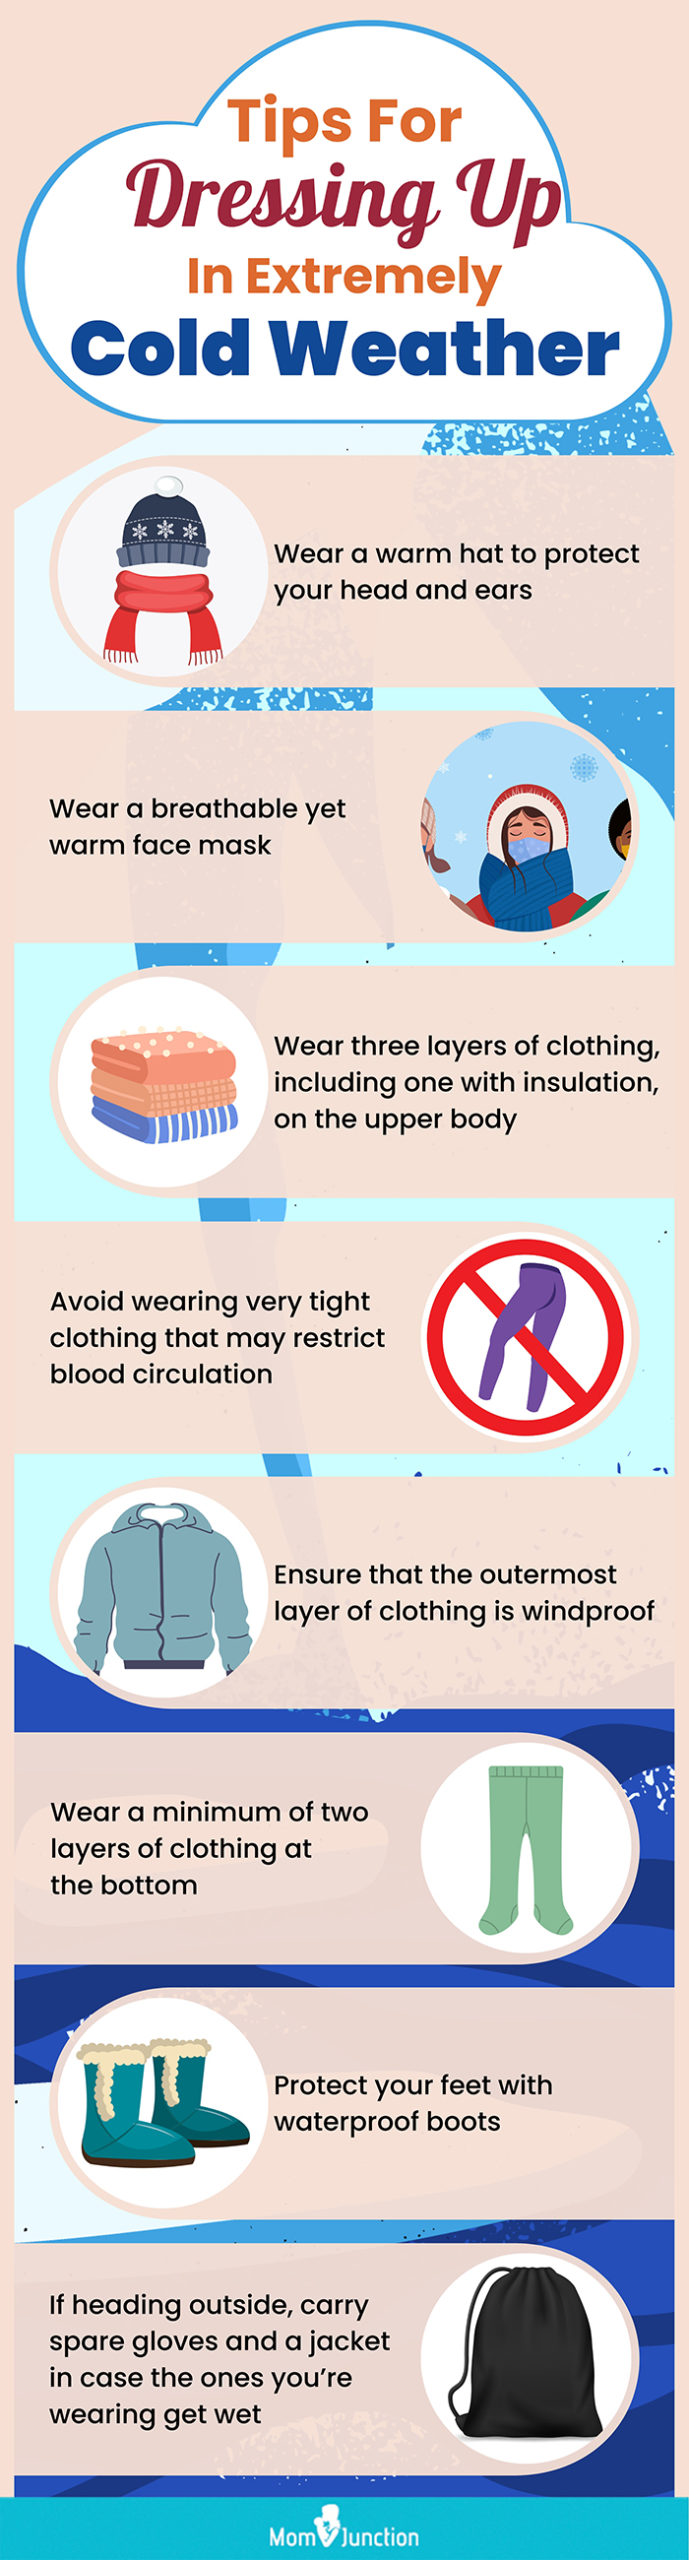 Tips For Dressing Up In Extremely Cold Weather